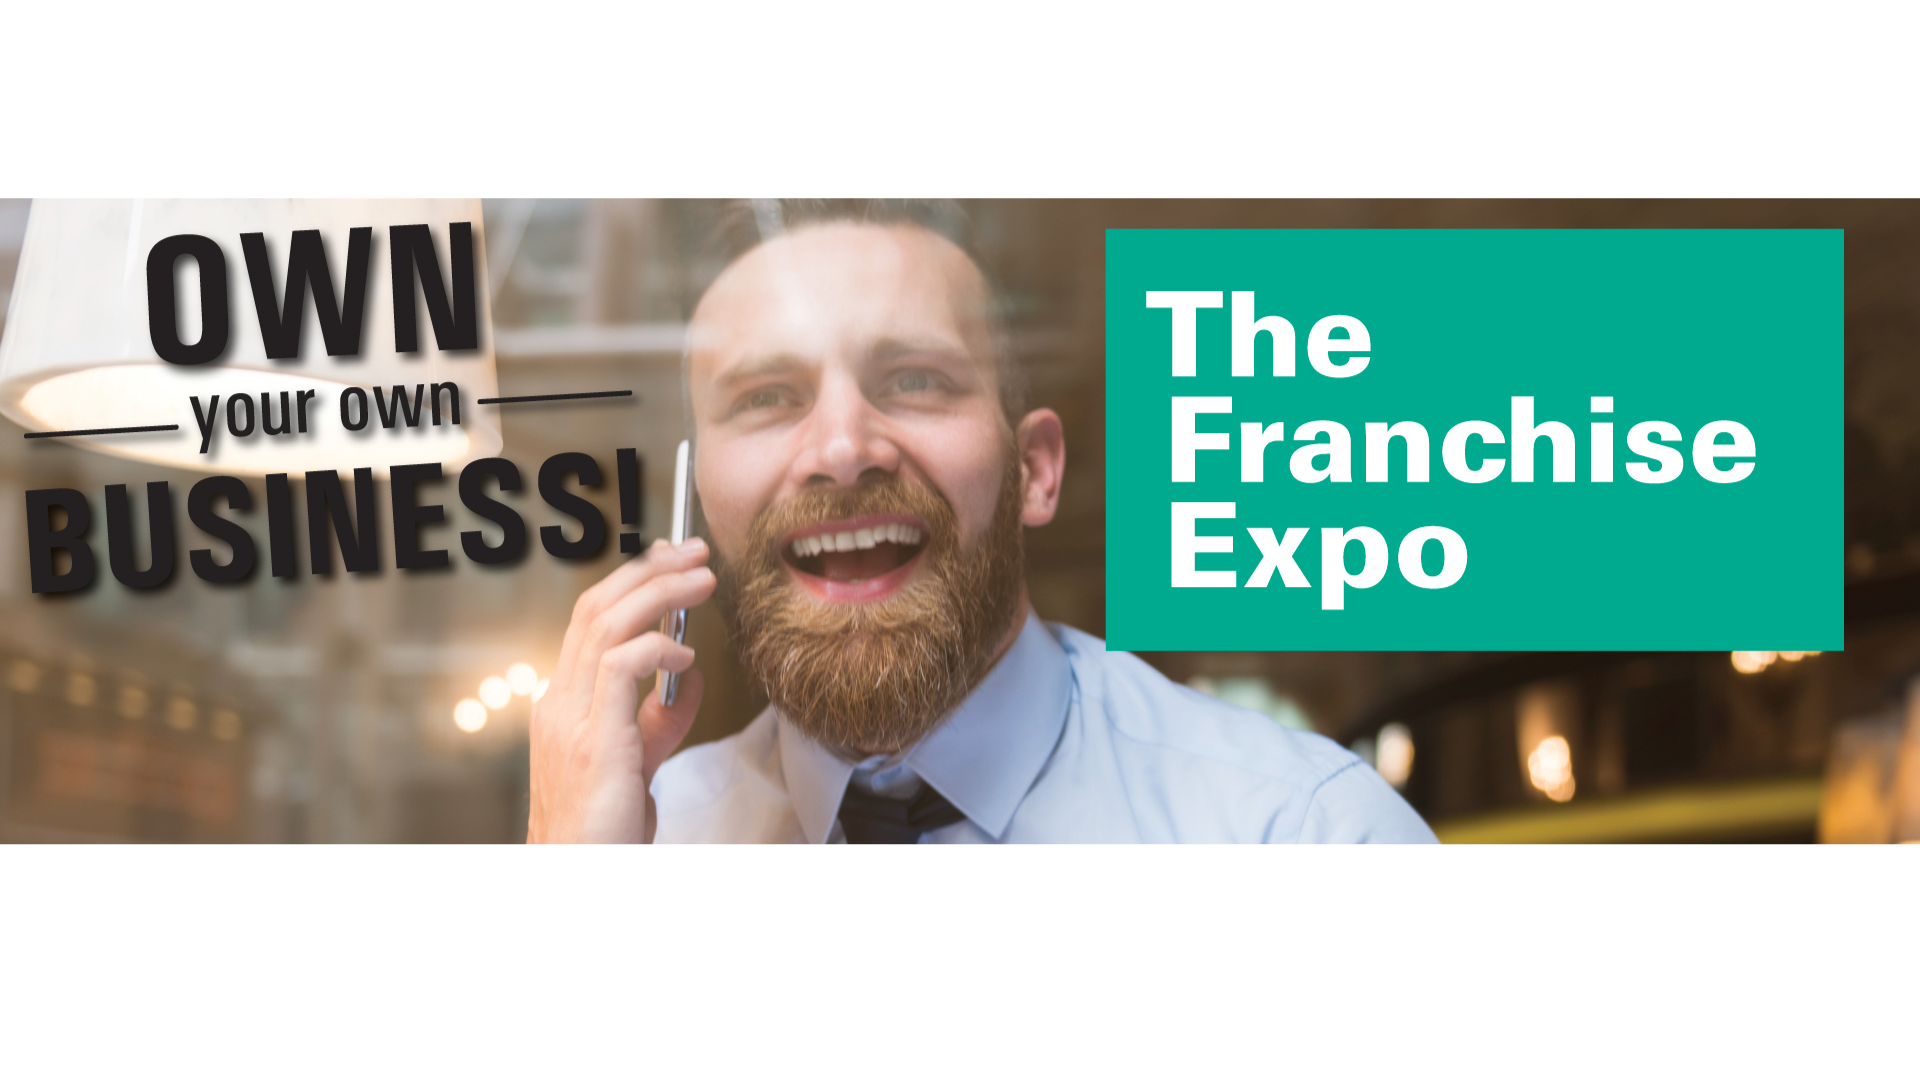 The Franchise Expo